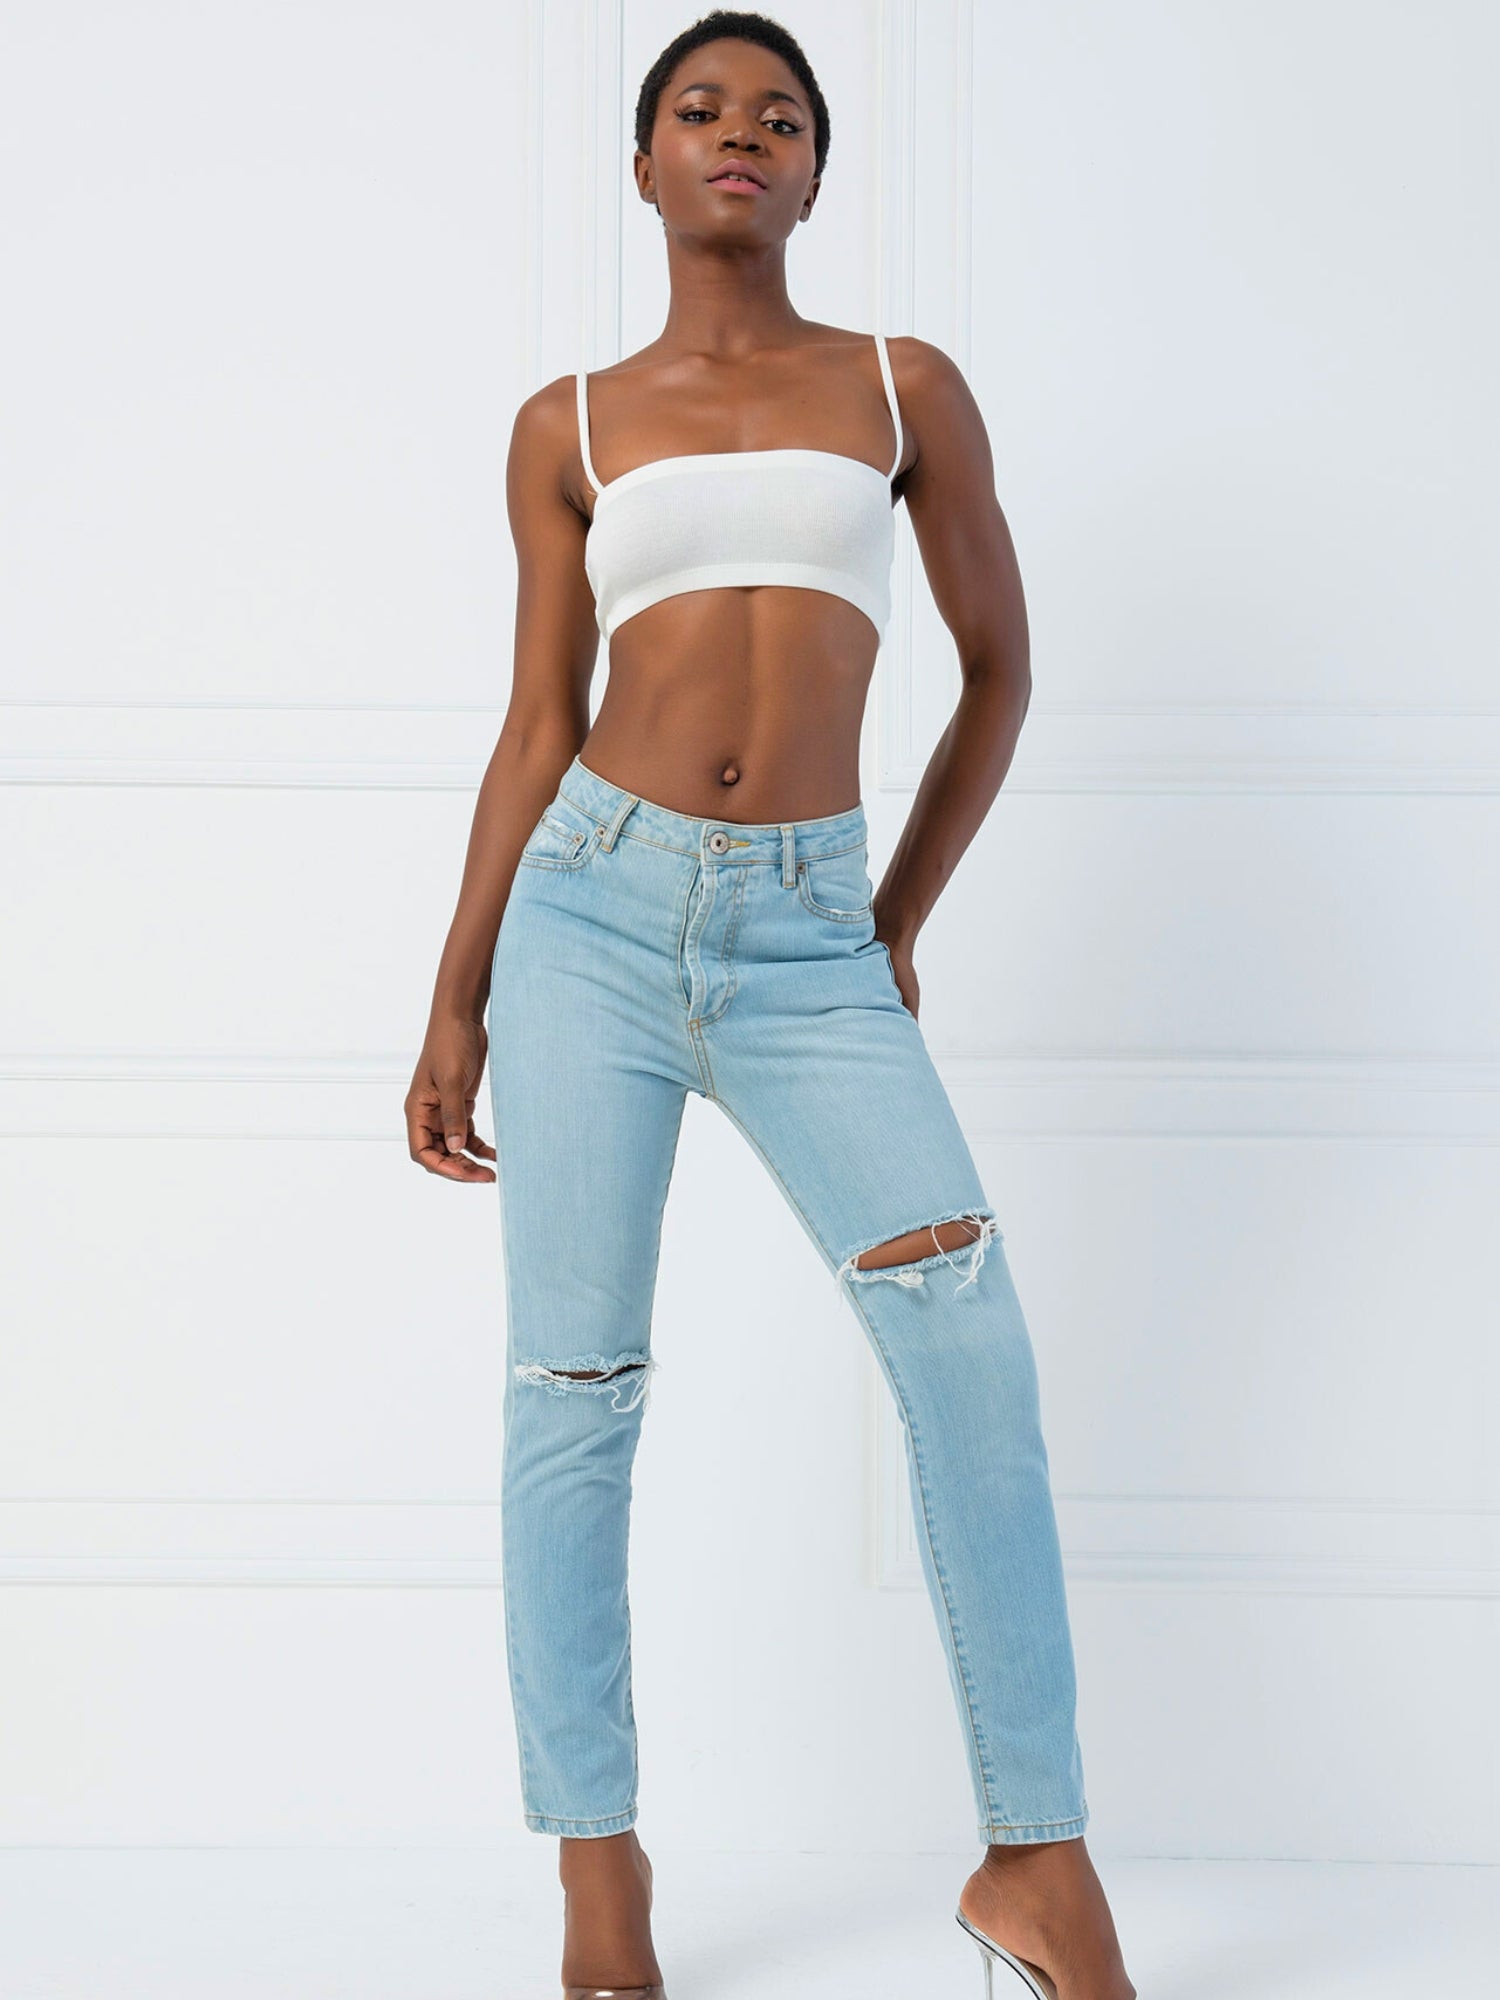 The Atwood Camisole Top - The Atwood Camisole Top is a classic basic essential perfect for layering. Made from soft material, the top is a comfortable and versatile piece that will add style to your wardrobe. An essential piece, the Atwood top comes in of